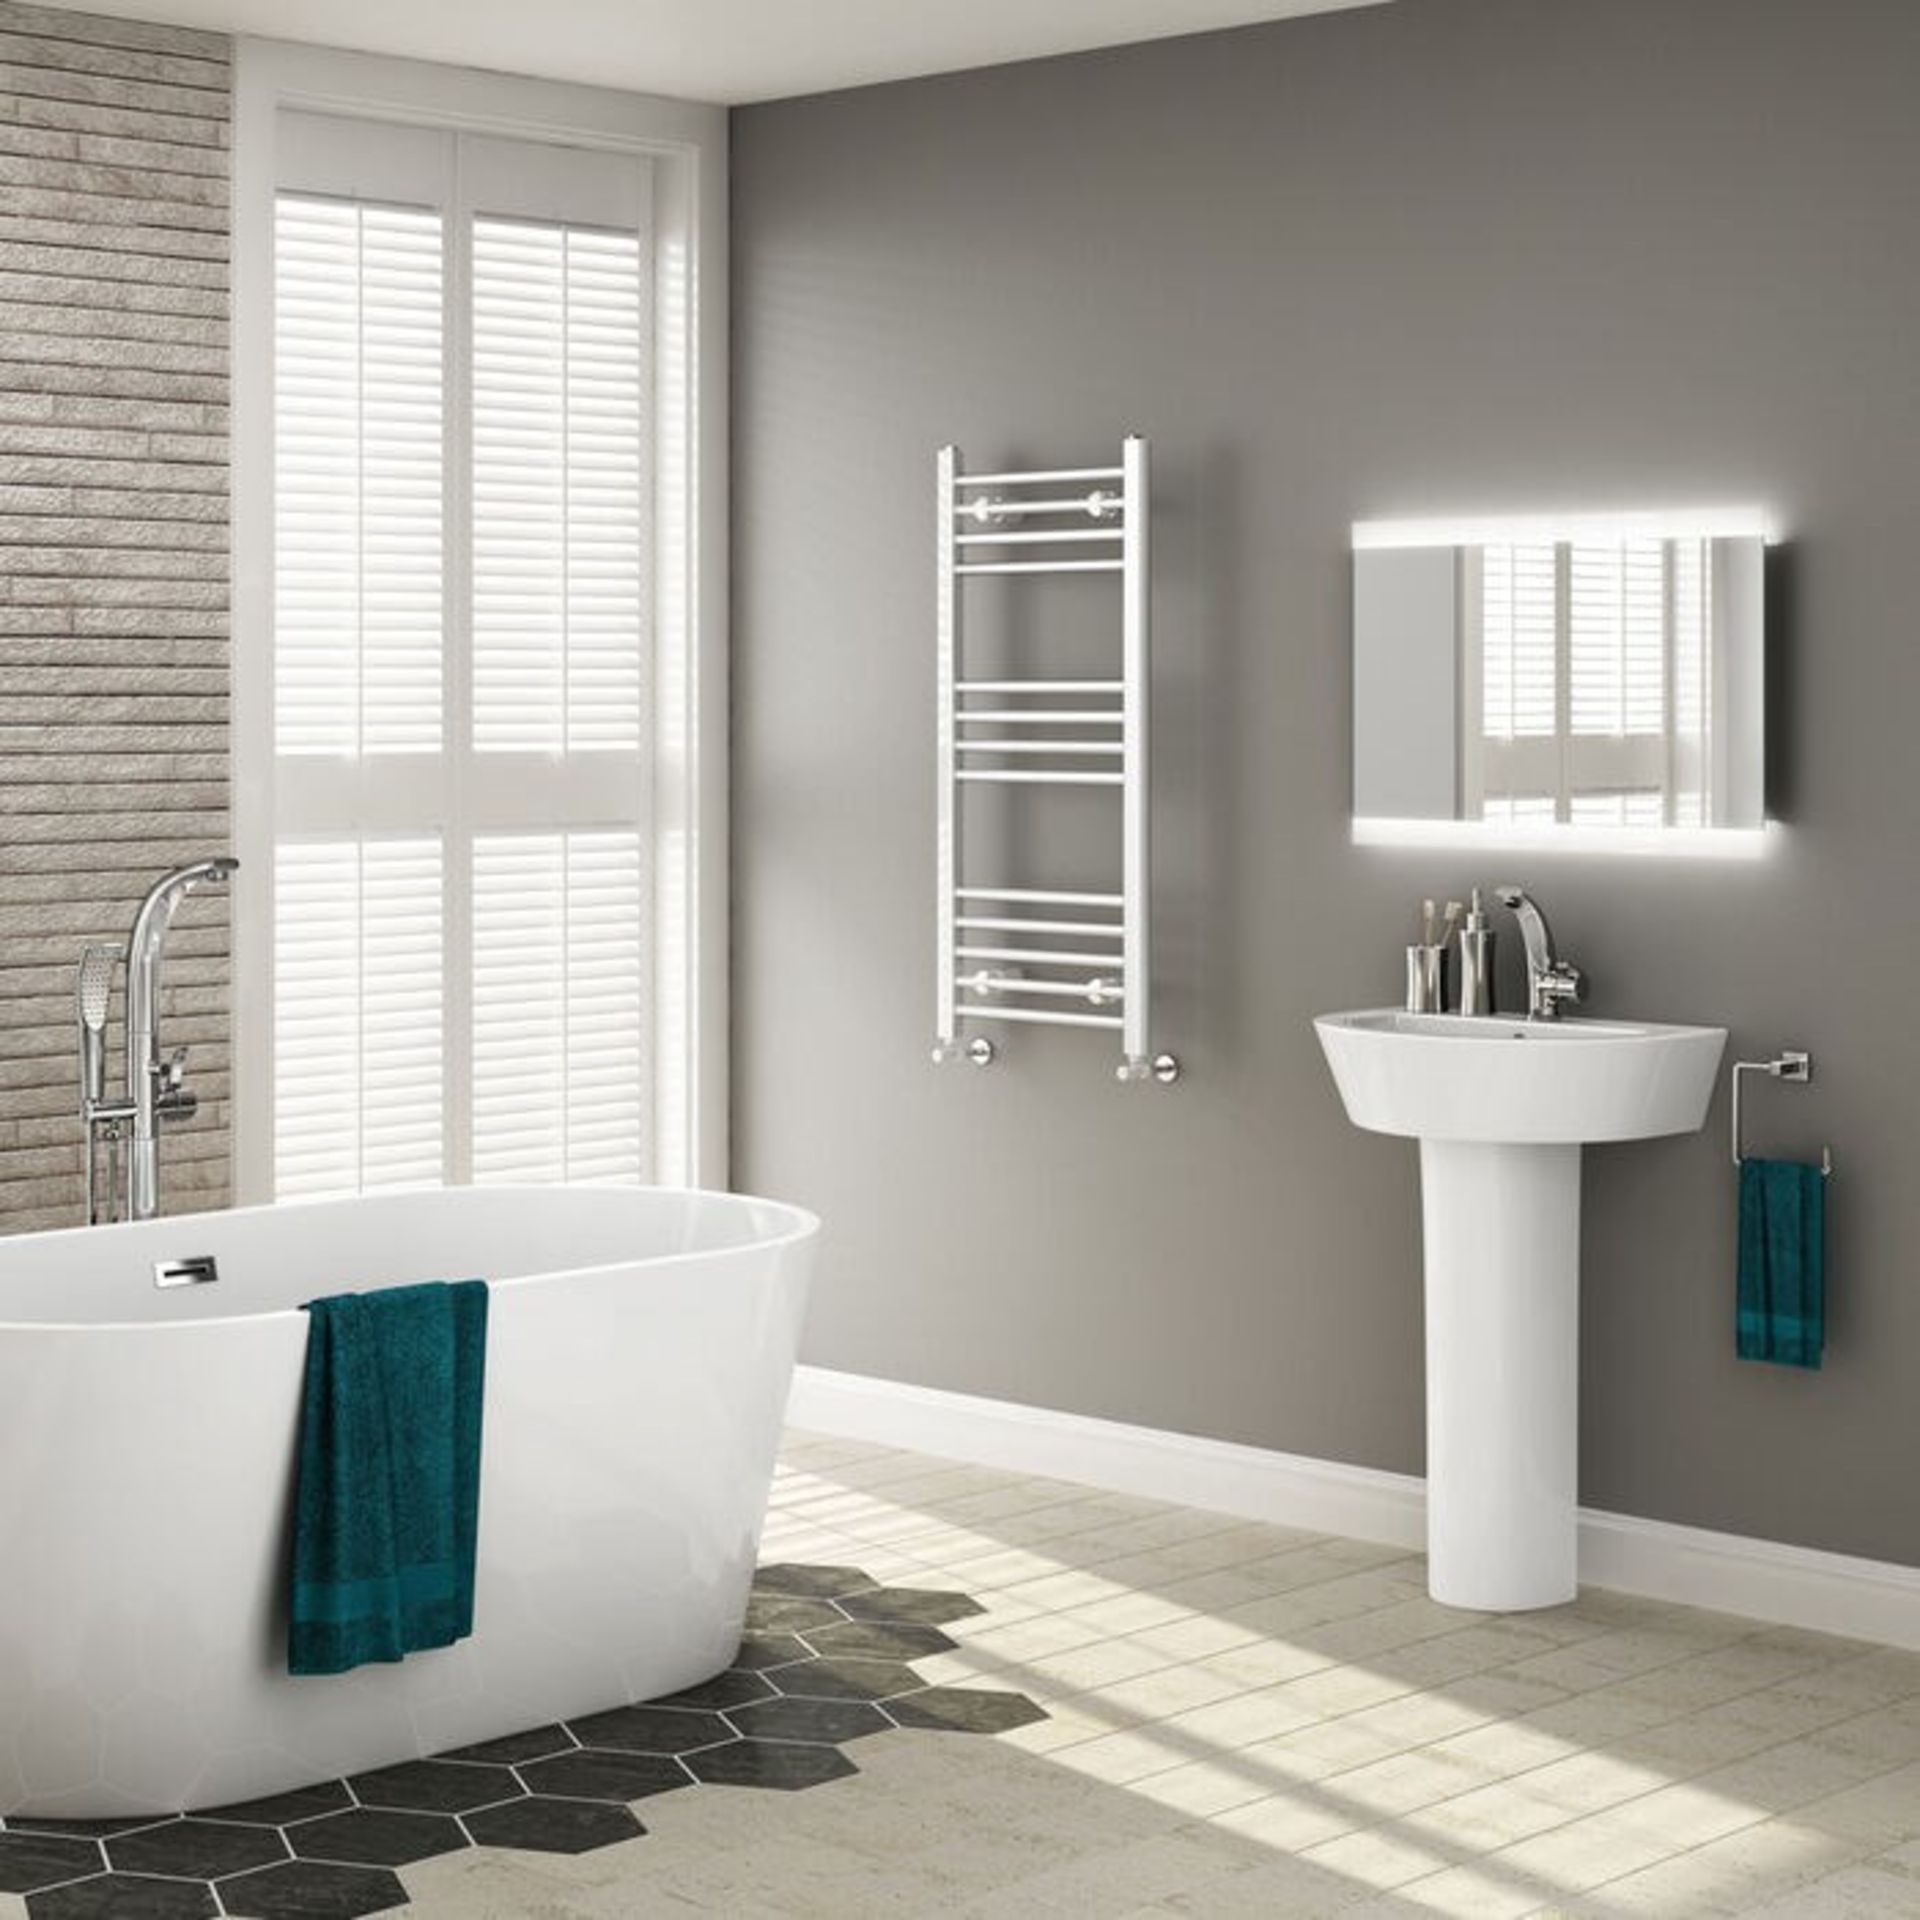 (VD161) 1100x500mm White Basic Towel radiator High gloss White.RRP £165.99.Made from low-carbo... - Image 2 of 3